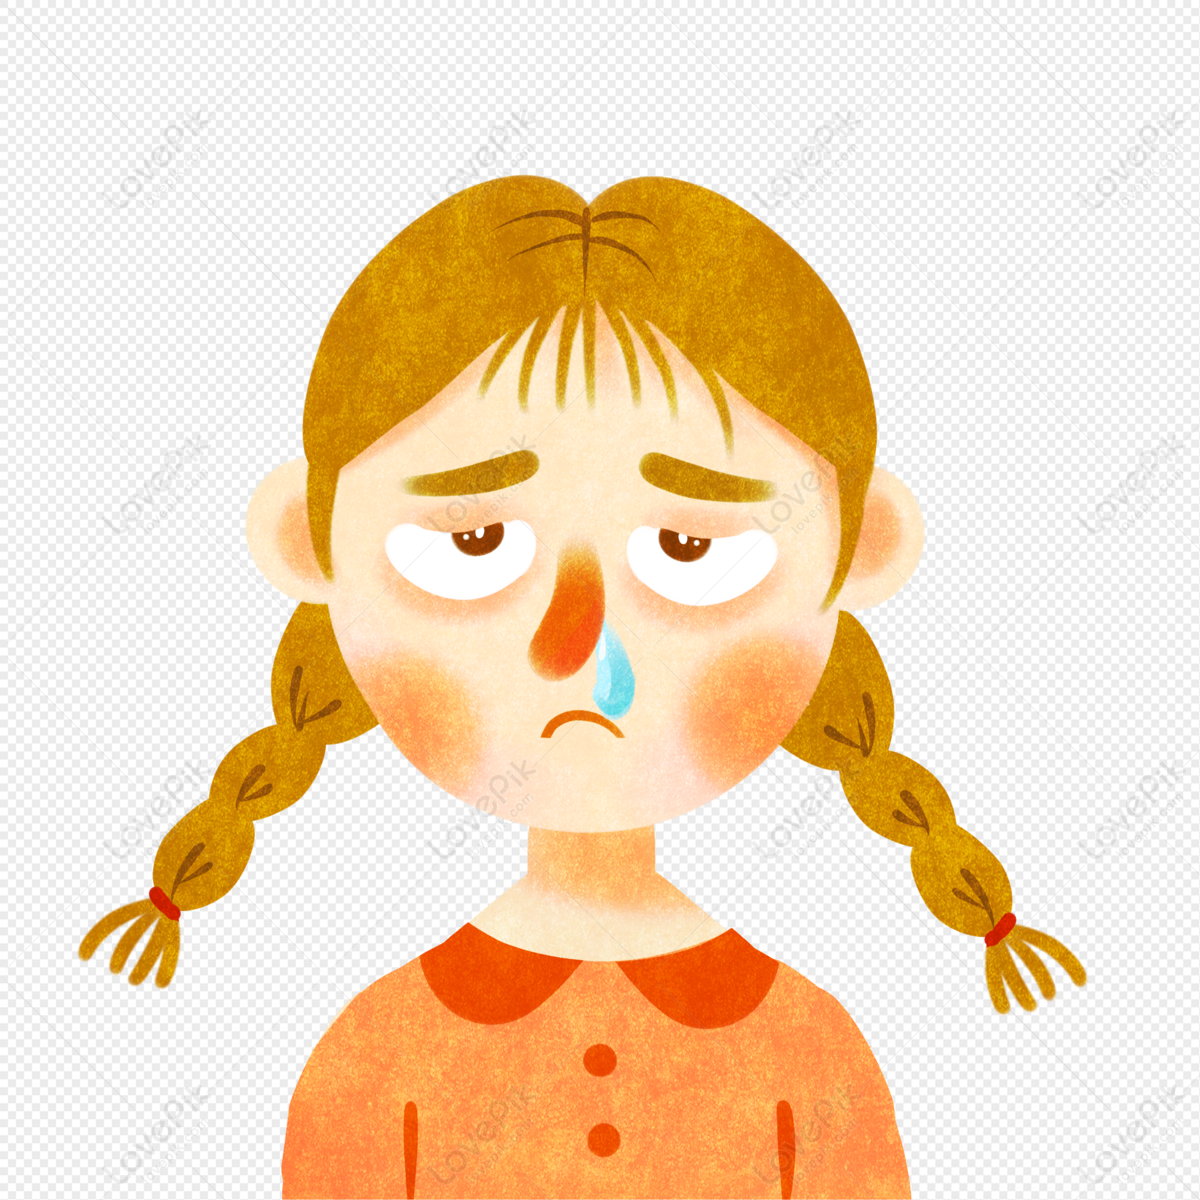 indignant face clipart png